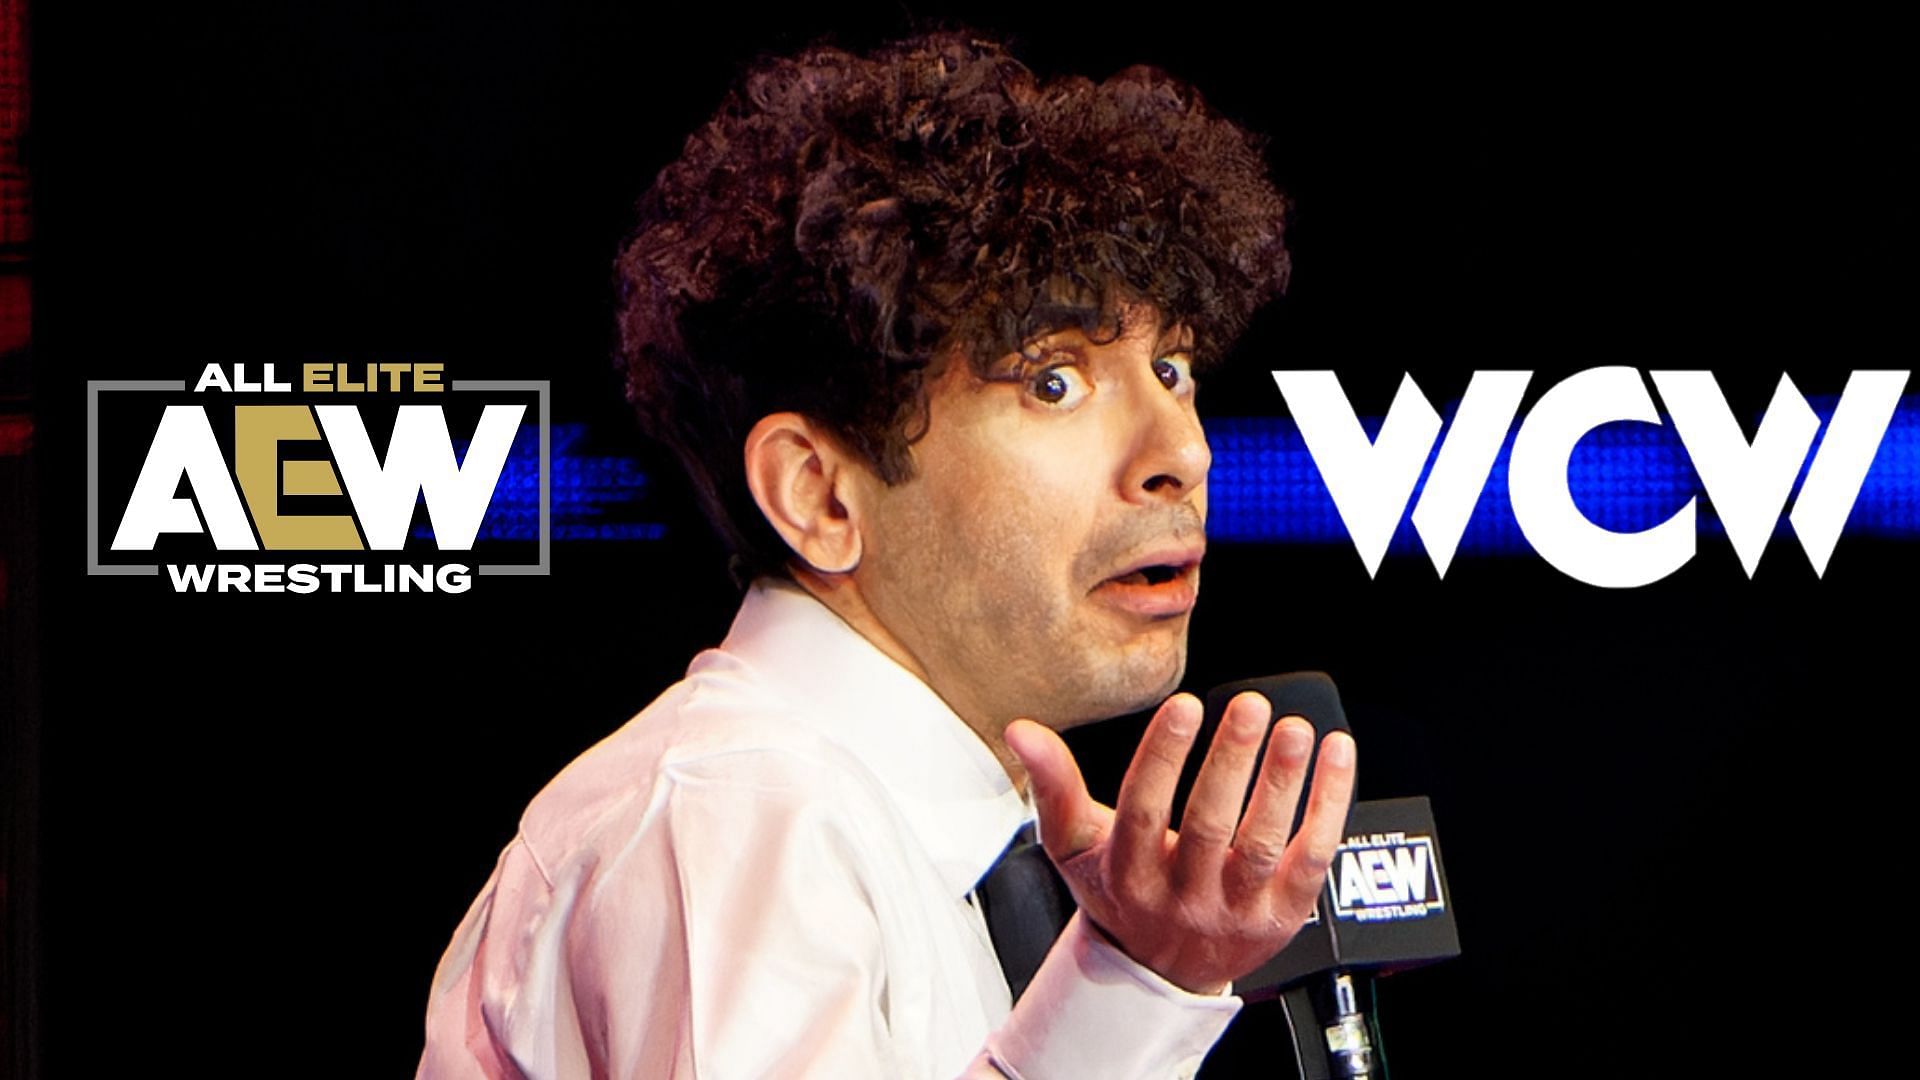 A WCW veteran was recently insulted by Tony Khan